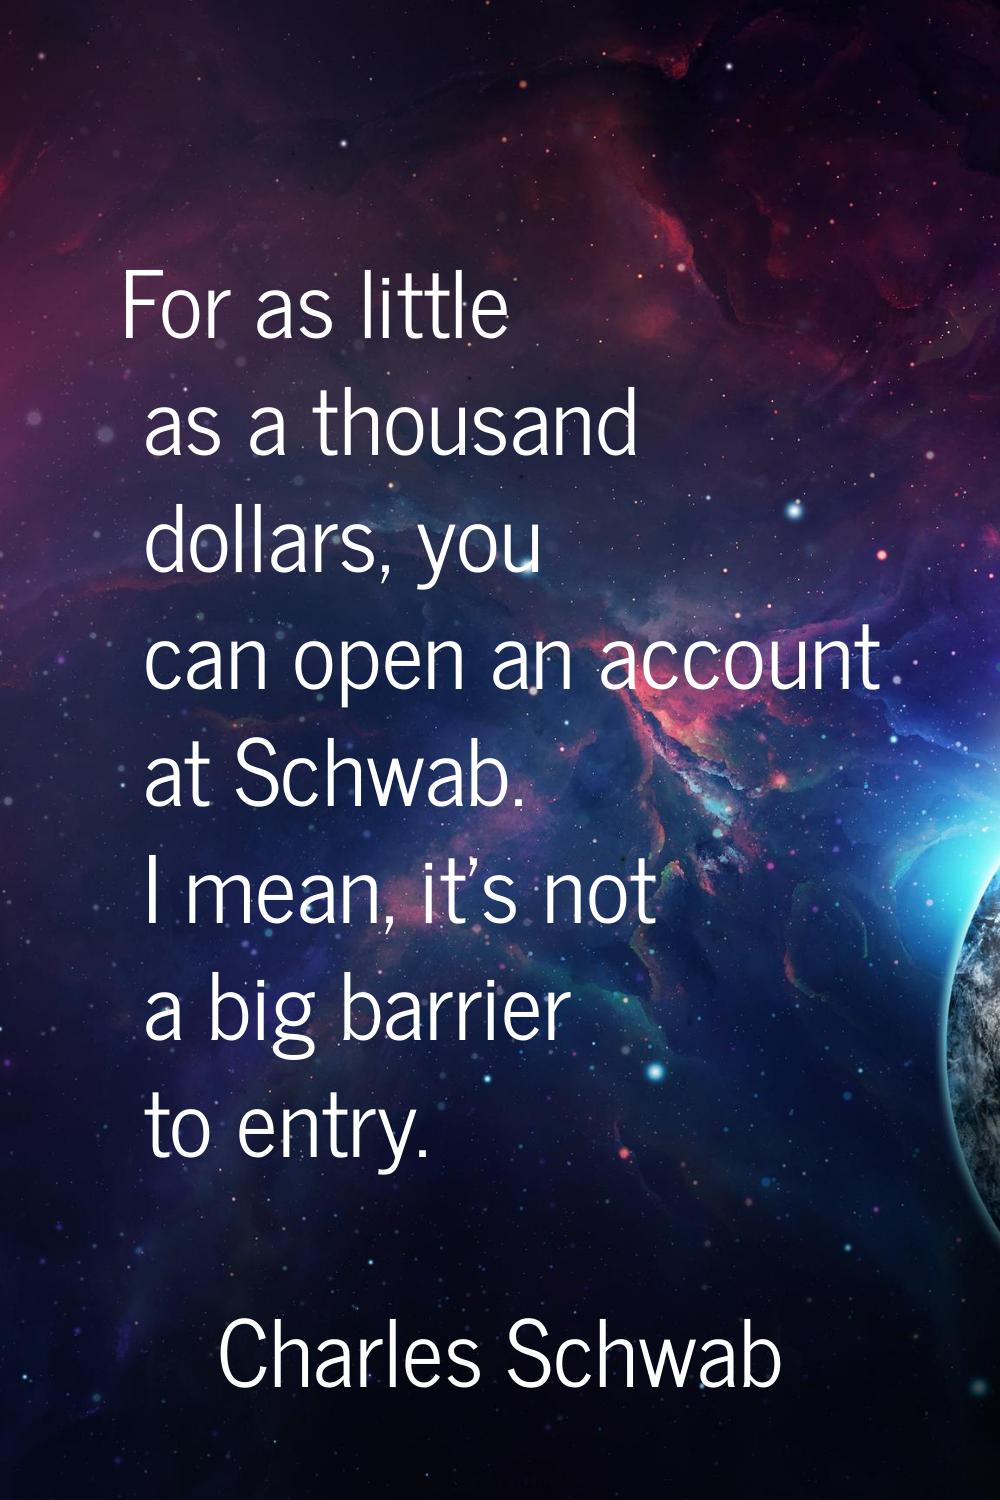 For as little as a thousand dollars, you can open an account at Schwab. I mean, it's not a big barr